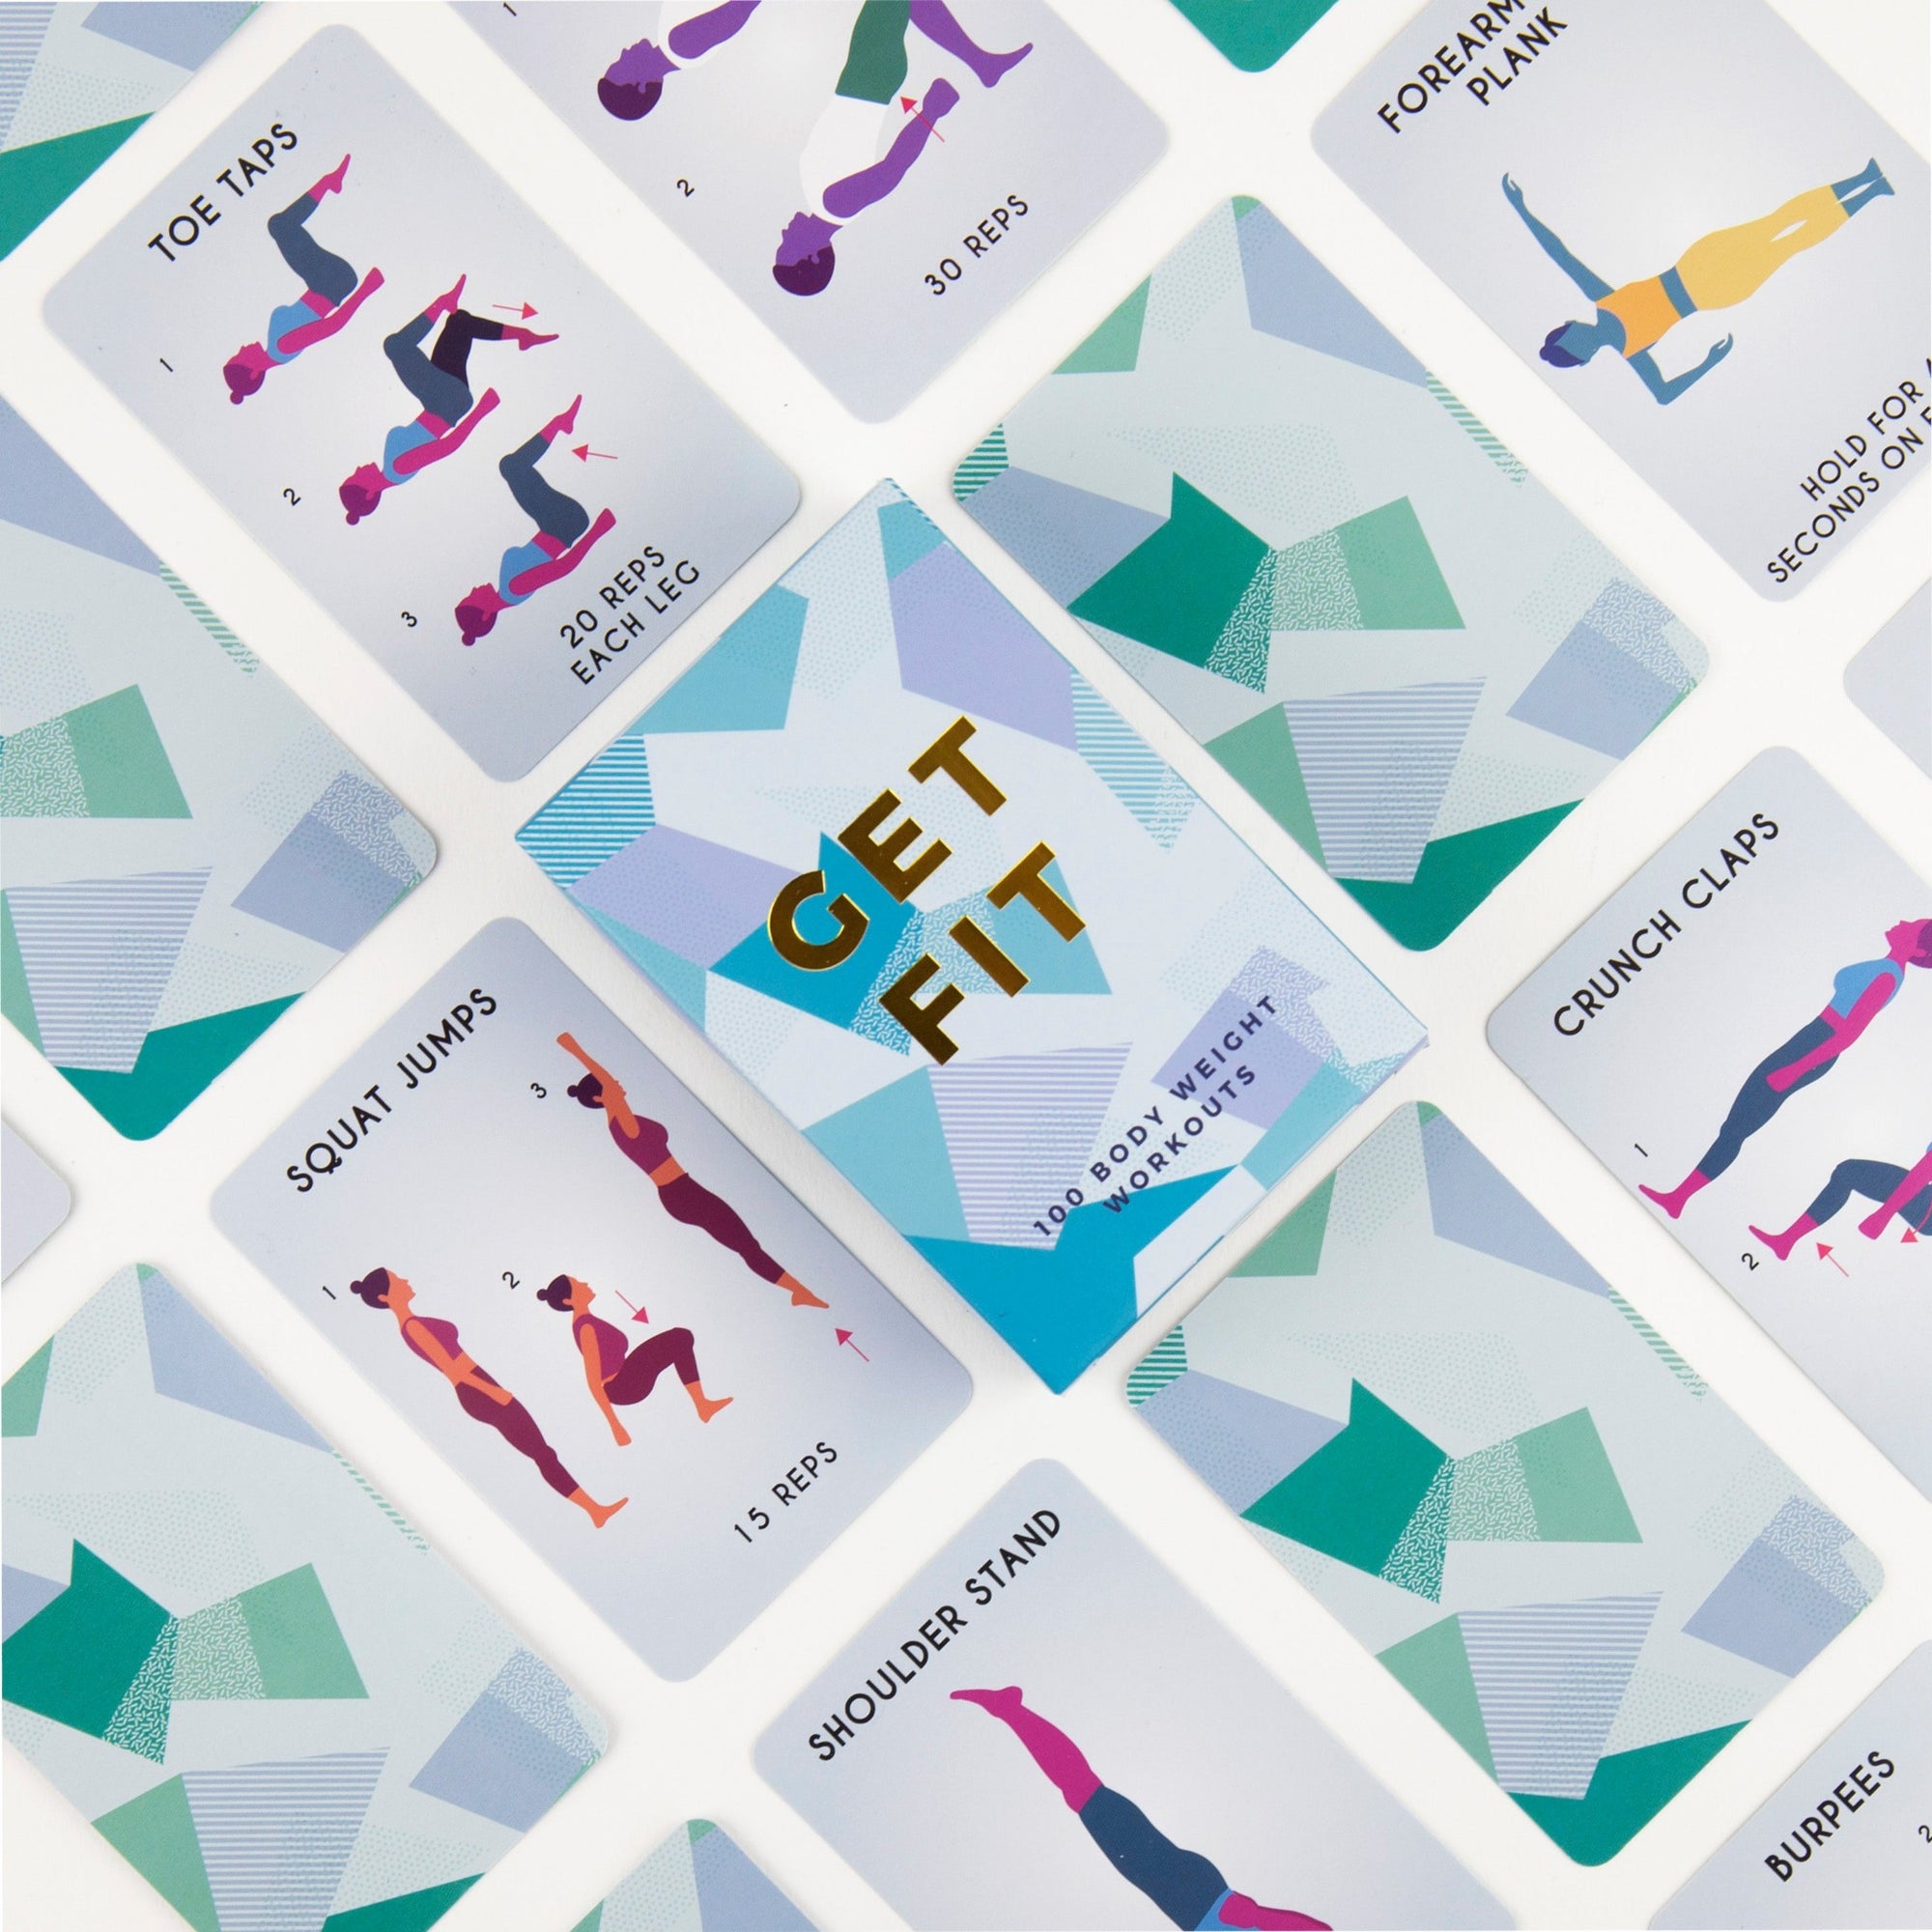 Get Fit Cards - Gift Republic